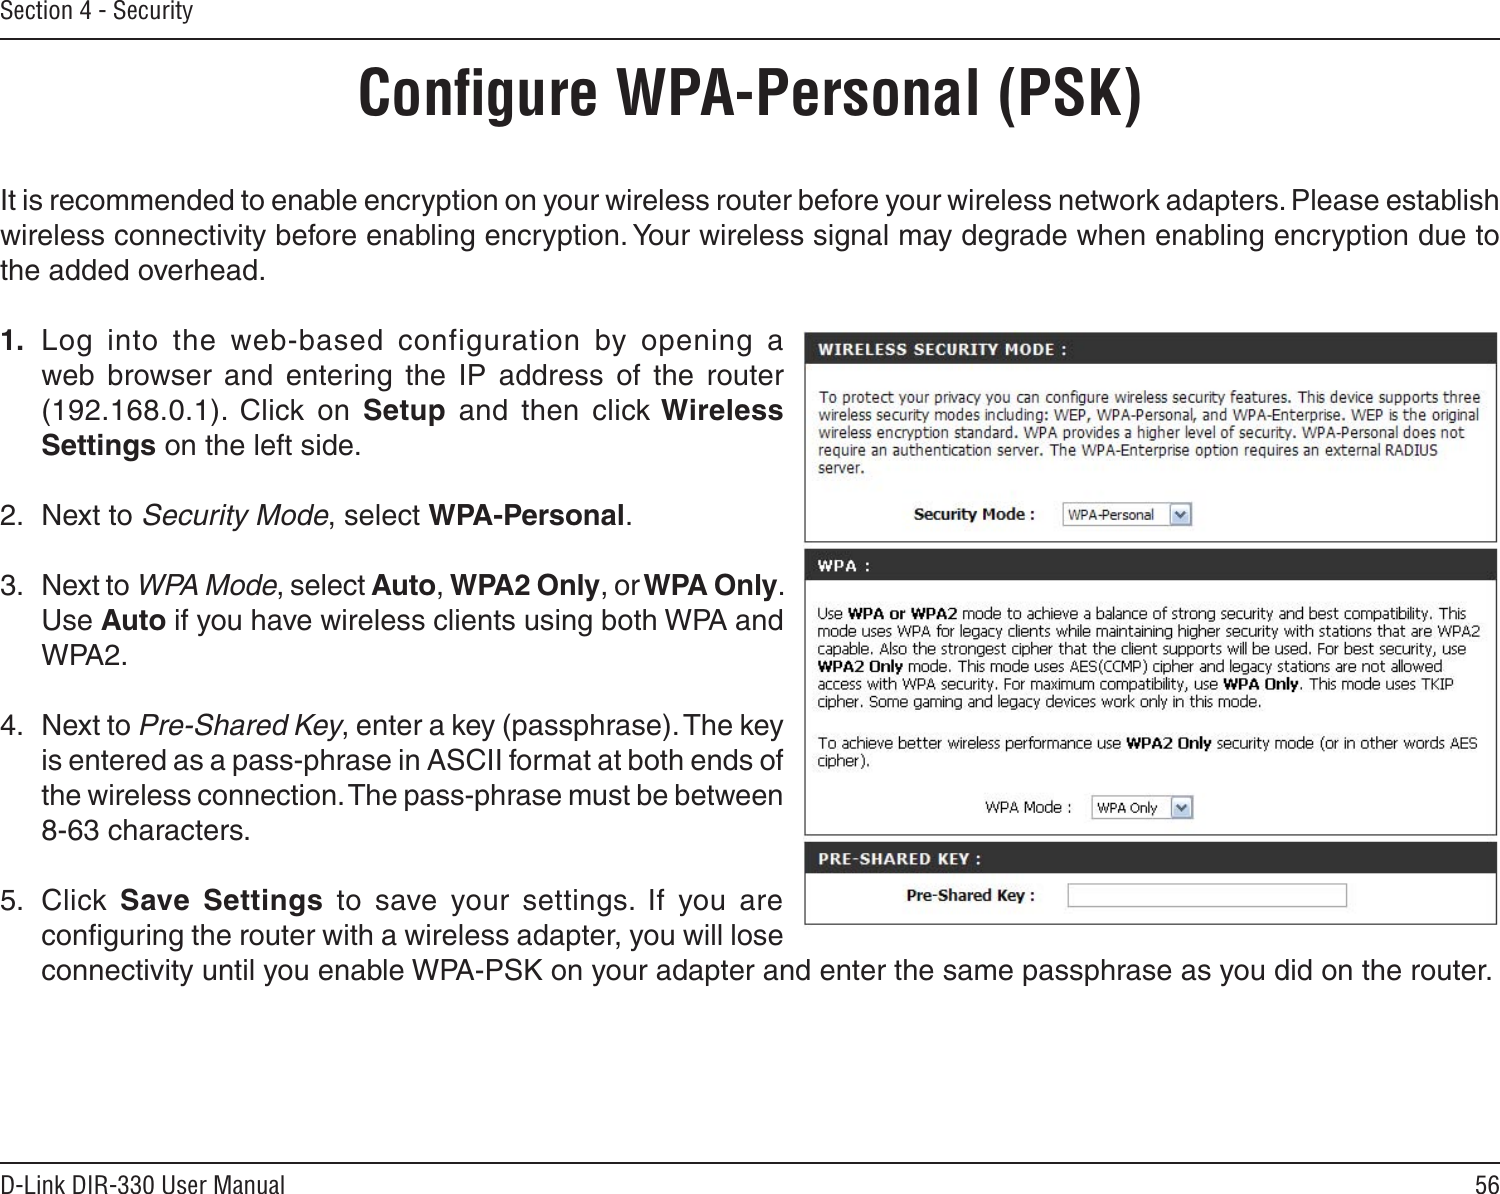 56D-Link DIR-330 User ManualSection 4 - SecurityConﬁgure WPA-Personal (PSK)It is recommended to enable encryption on your wireless router before your wireless network adapters. Please establish wireless connectivity before enabling encryption. Your wireless signal may degrade when enabling encryption due to the added overhead.1.  Log  into  the  web-based  configuration  by  opening  a web  browser  and  entering  the  IP  address  of  the  router (192.168.0.1).  Click  on  Setup  and  then  click Wireless Settings on the left side.2.  Next to Security Mode, select WPA-Personal.3.  Next to WPA Mode, select Auto, WPA2 Only, or WPA Only. Use Auto if you have wireless clients using both WPA and WPA2.4.  Next to Pre-Shared Key, enter a key (passphrase). The key is entered as a pass-phrase in ASCII format at both ends of the wireless connection. The pass-phrase must be between 8-63 characters. 5.  Click  Save  Settings  to  save  your  settings.  If  you  are conﬁguring the router with a wireless adapter, you will lose connectivity until you enable WPA-PSK on your adapter and enter the same passphrase as you did on the router.